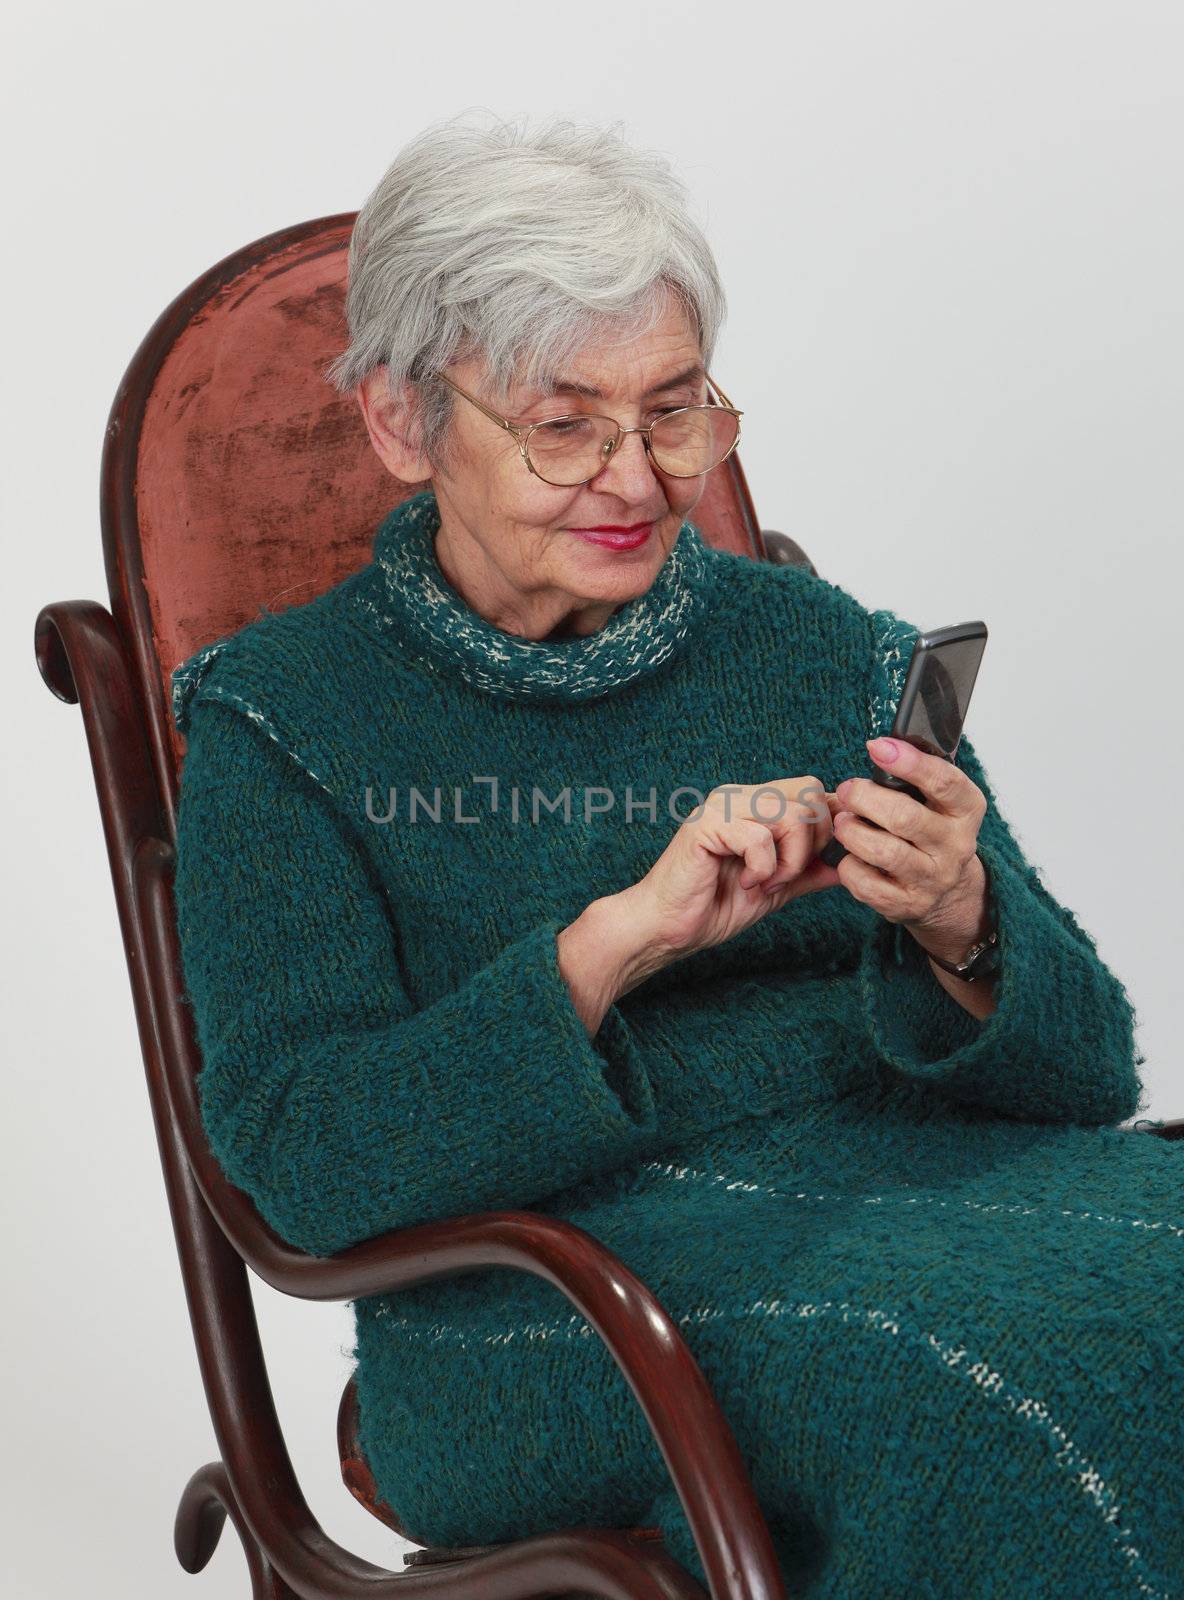 Close up image of a senior woman siting in a rocker and writing a phone message.